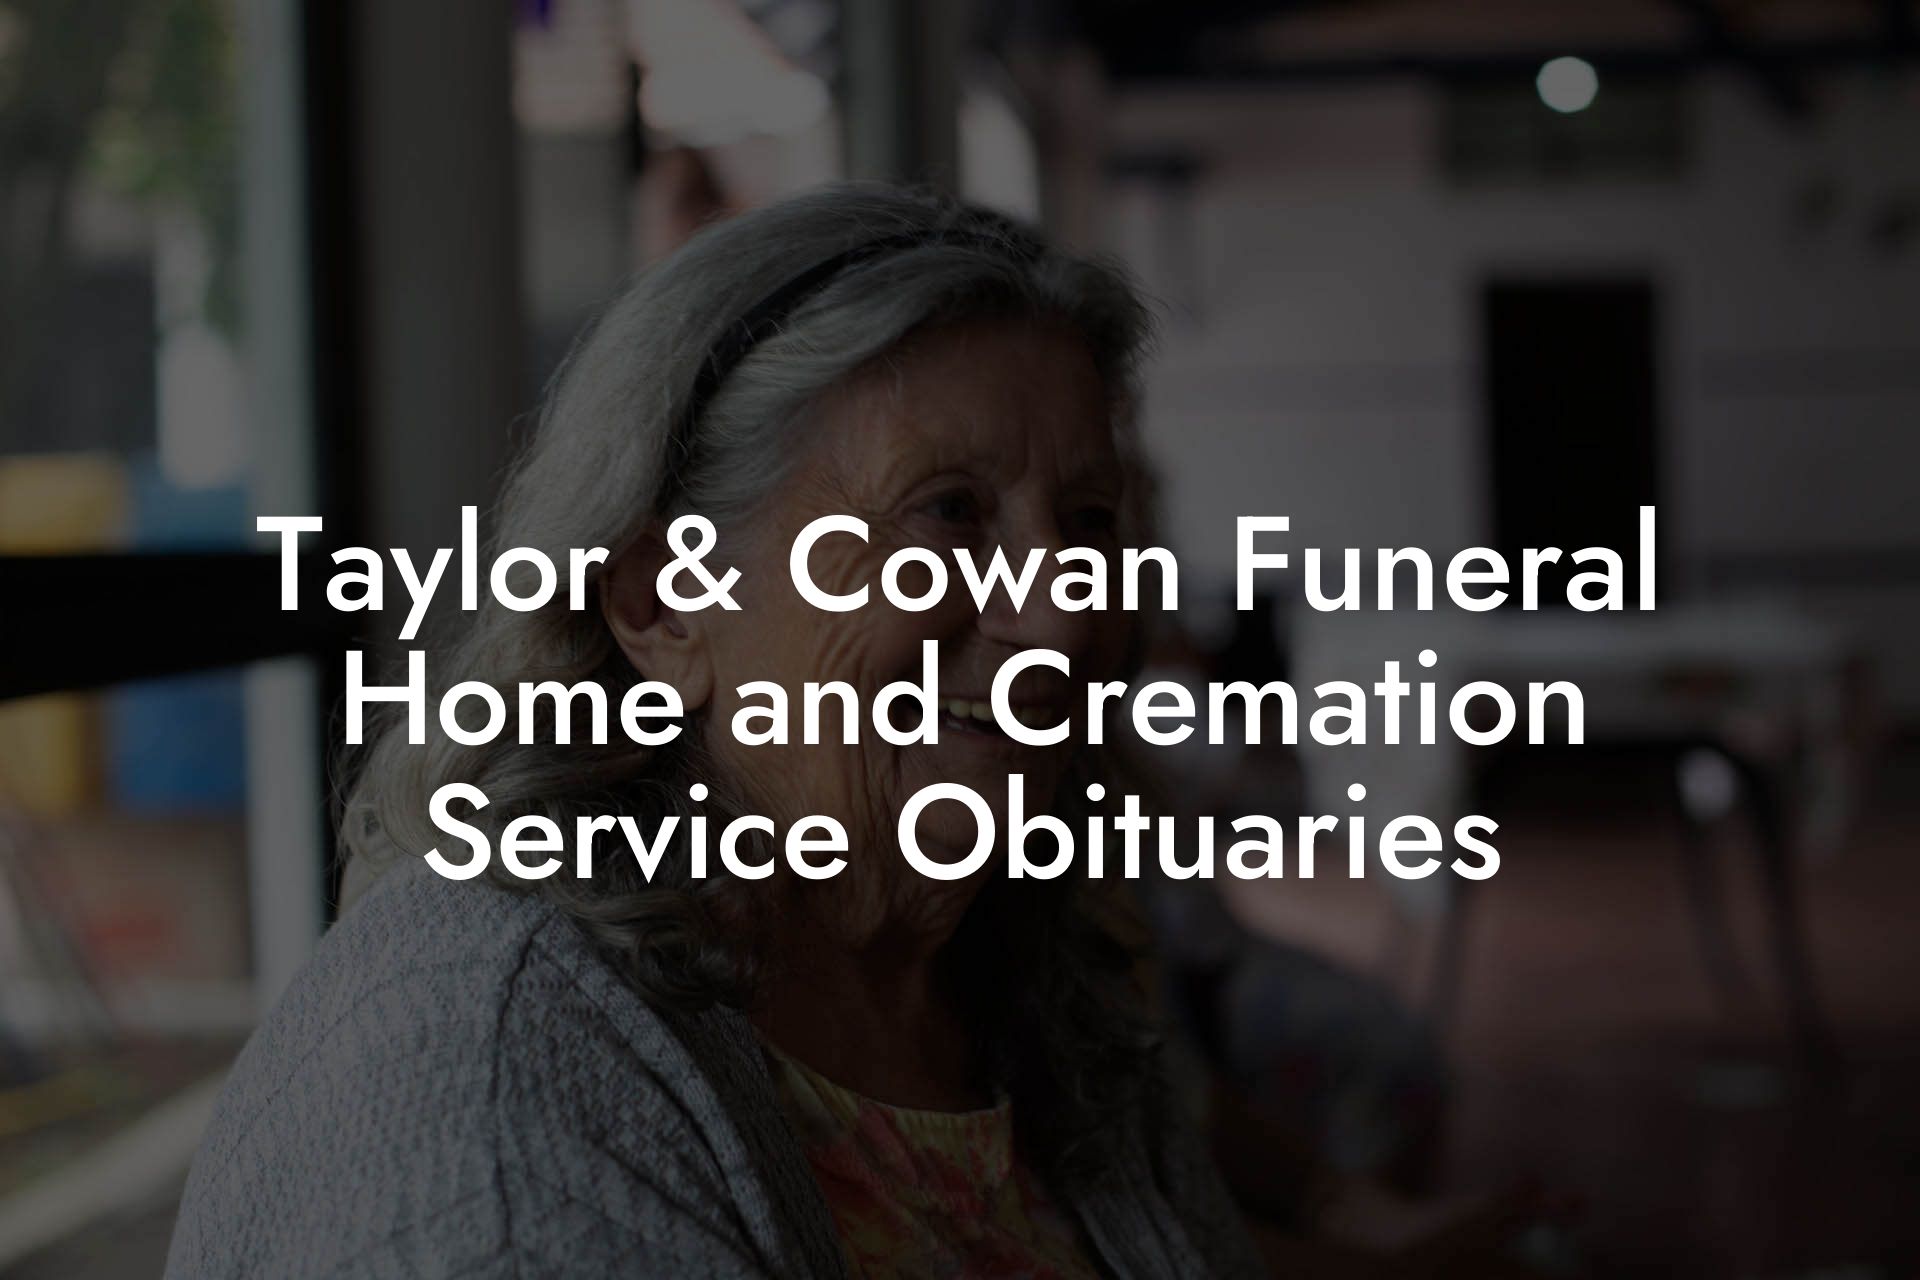 Taylor & Cowan Funeral Home and Cremation Service Obituaries